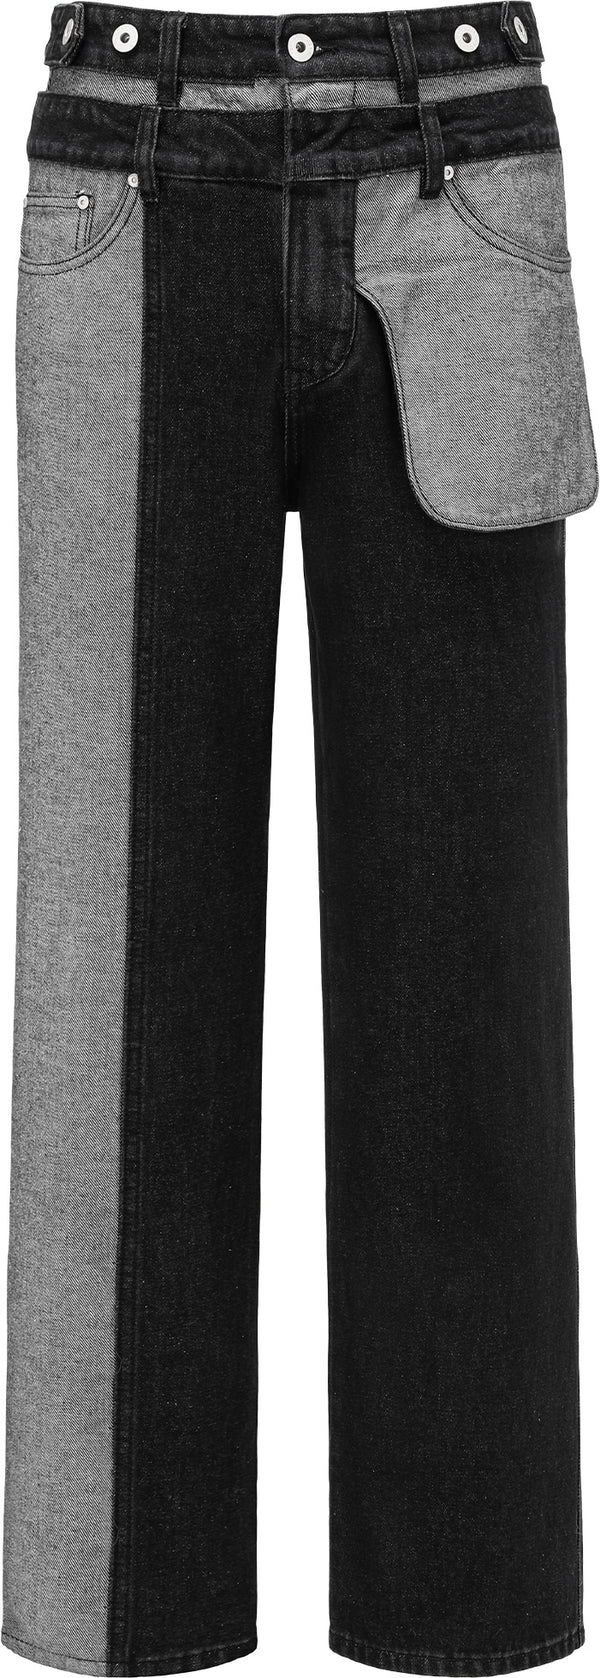 INSIDE OUT DENIM TROUSERS